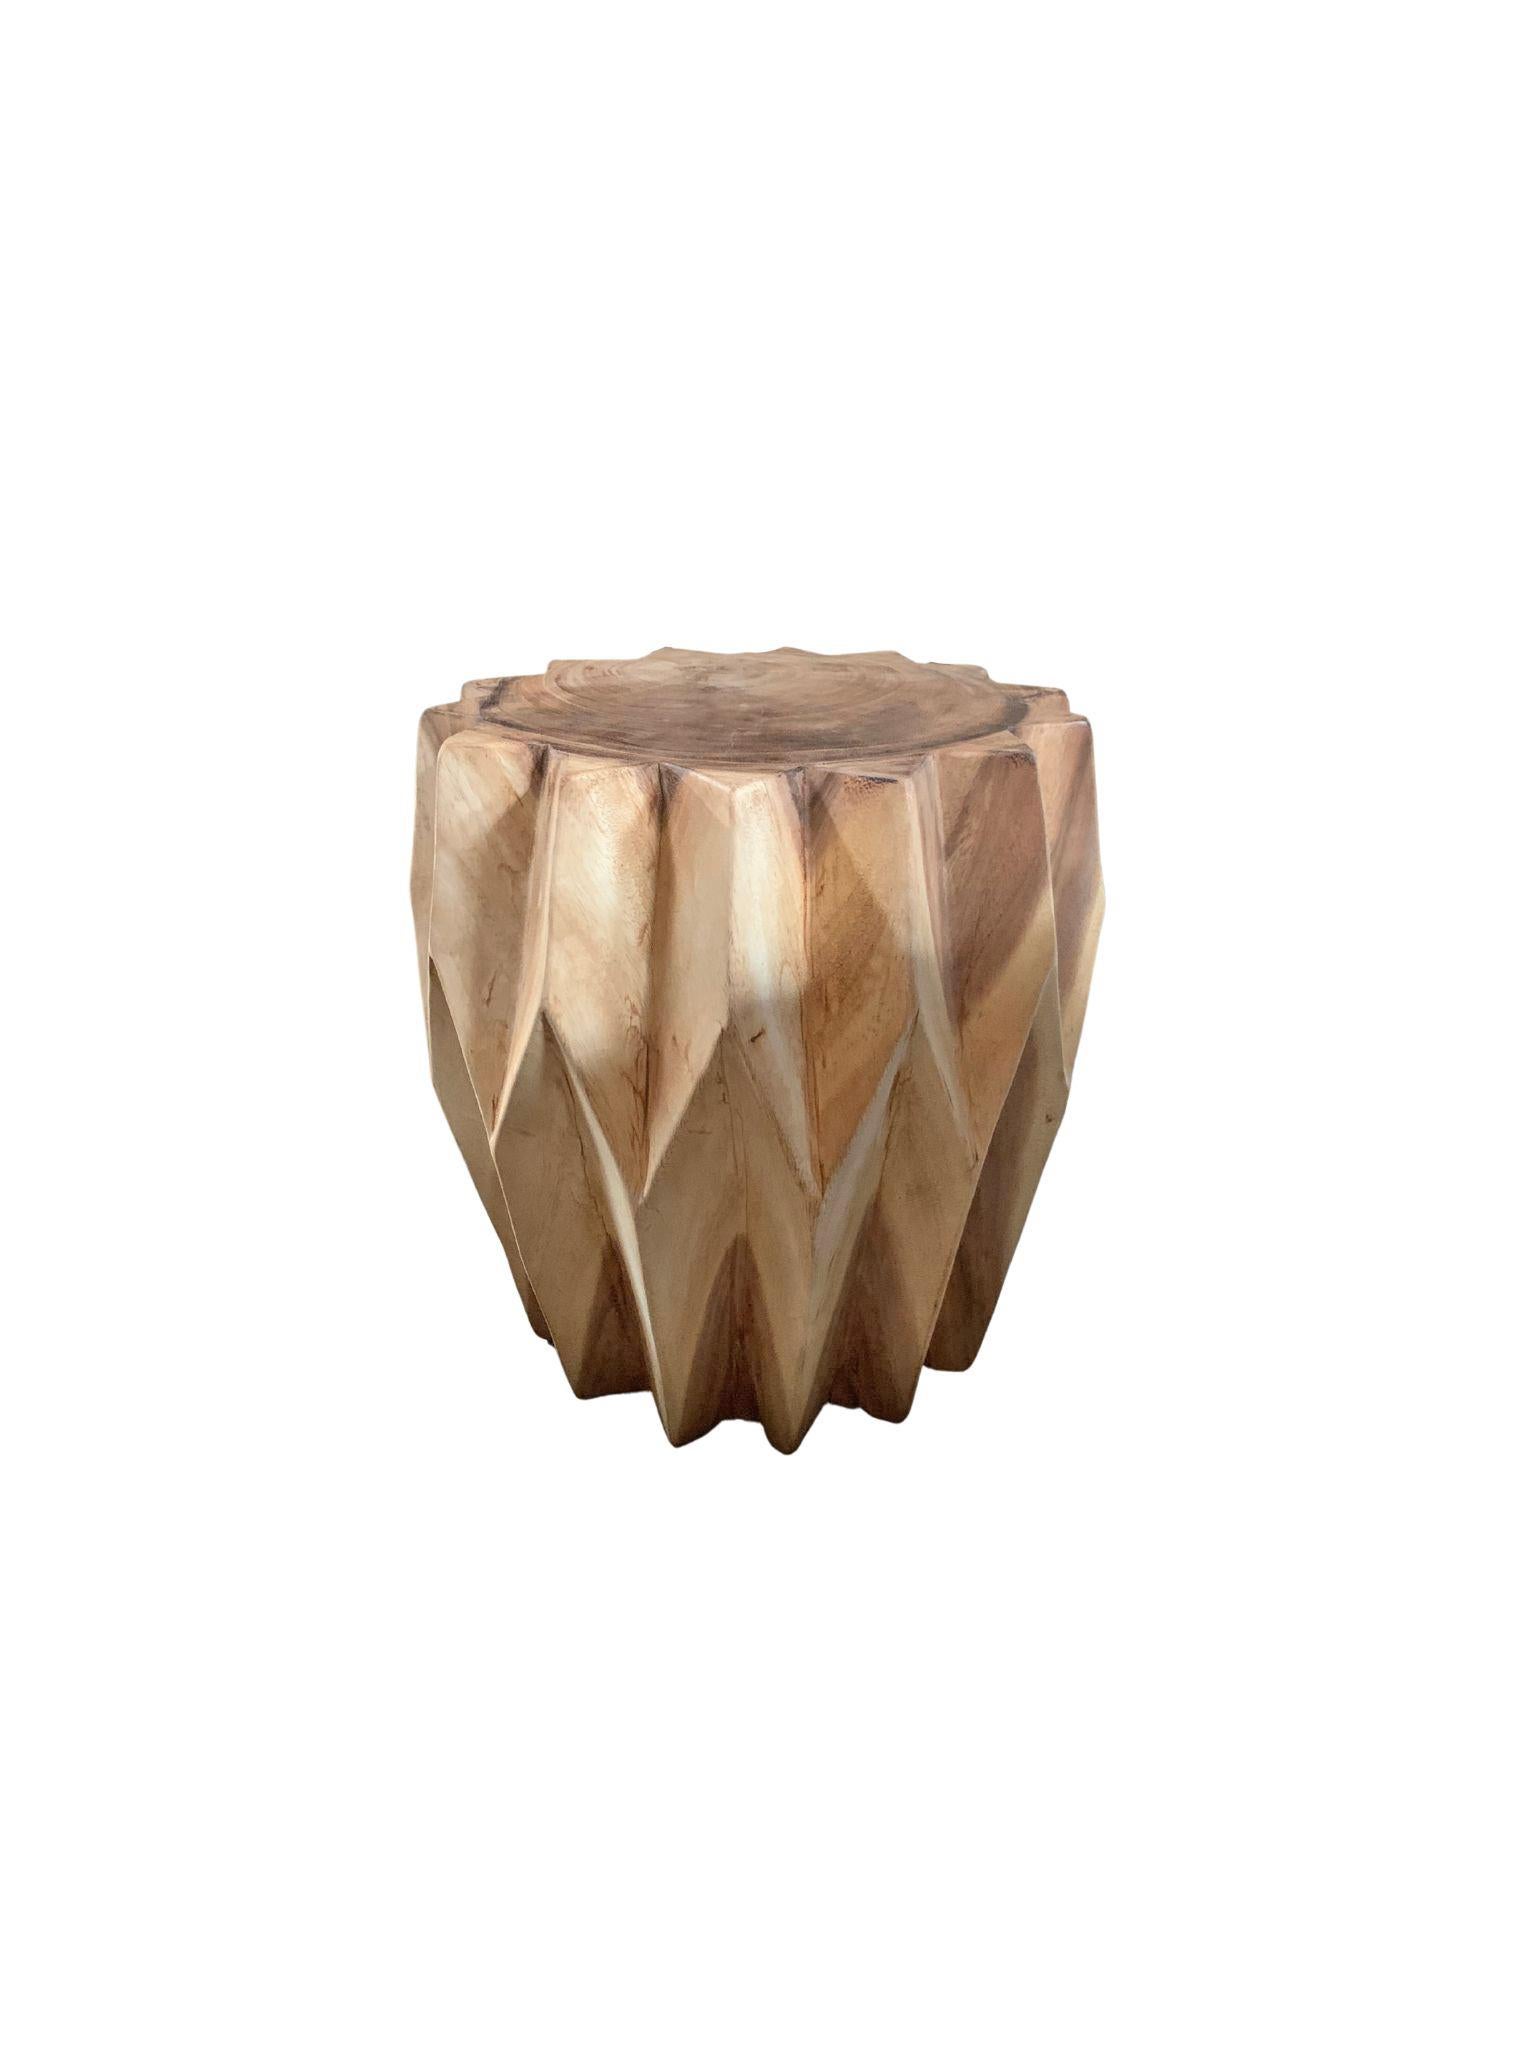 Hand-Crafted Geometric Solid Mango Wood Table For Sale